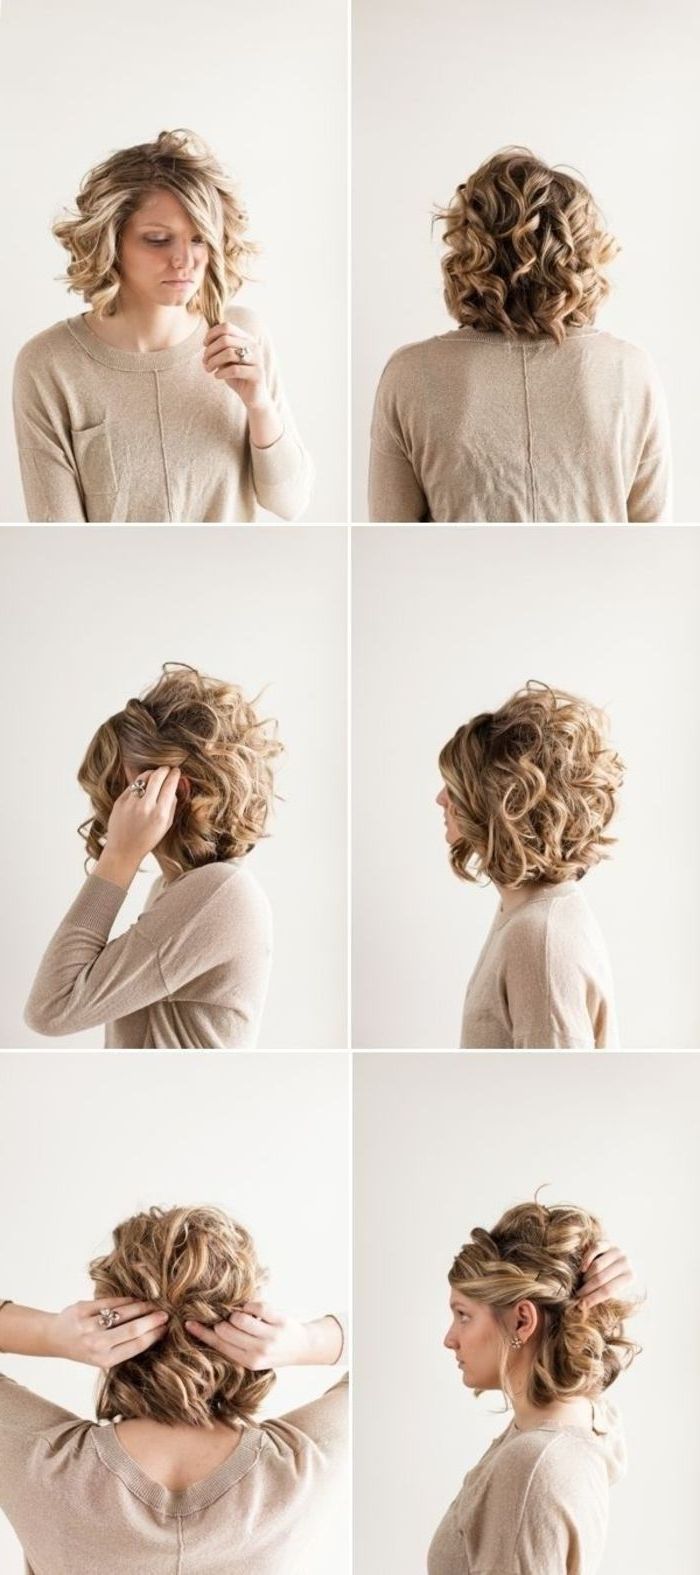 Hair Pictorial (View 1 of 15)